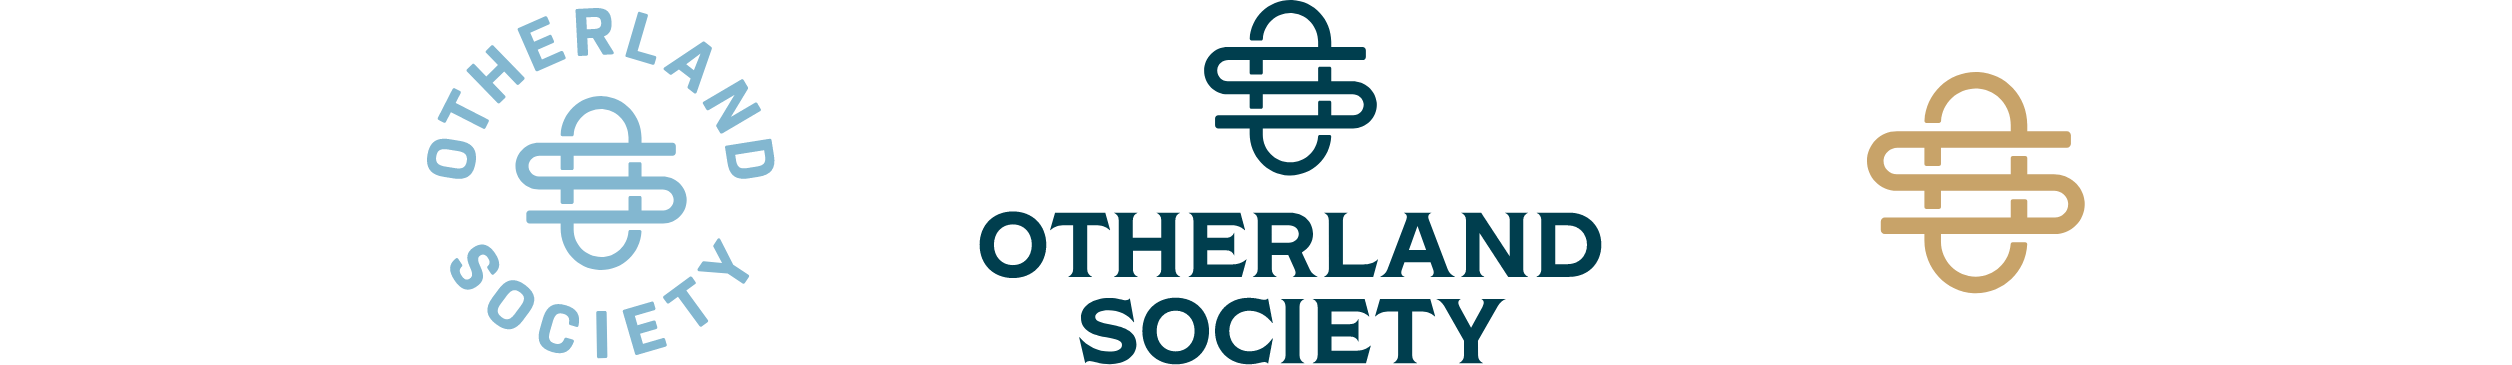 Otherland Society logos featuring circular logo crest in blue, full logo lockup with monogram and logotype in dark blue, monogram in gold